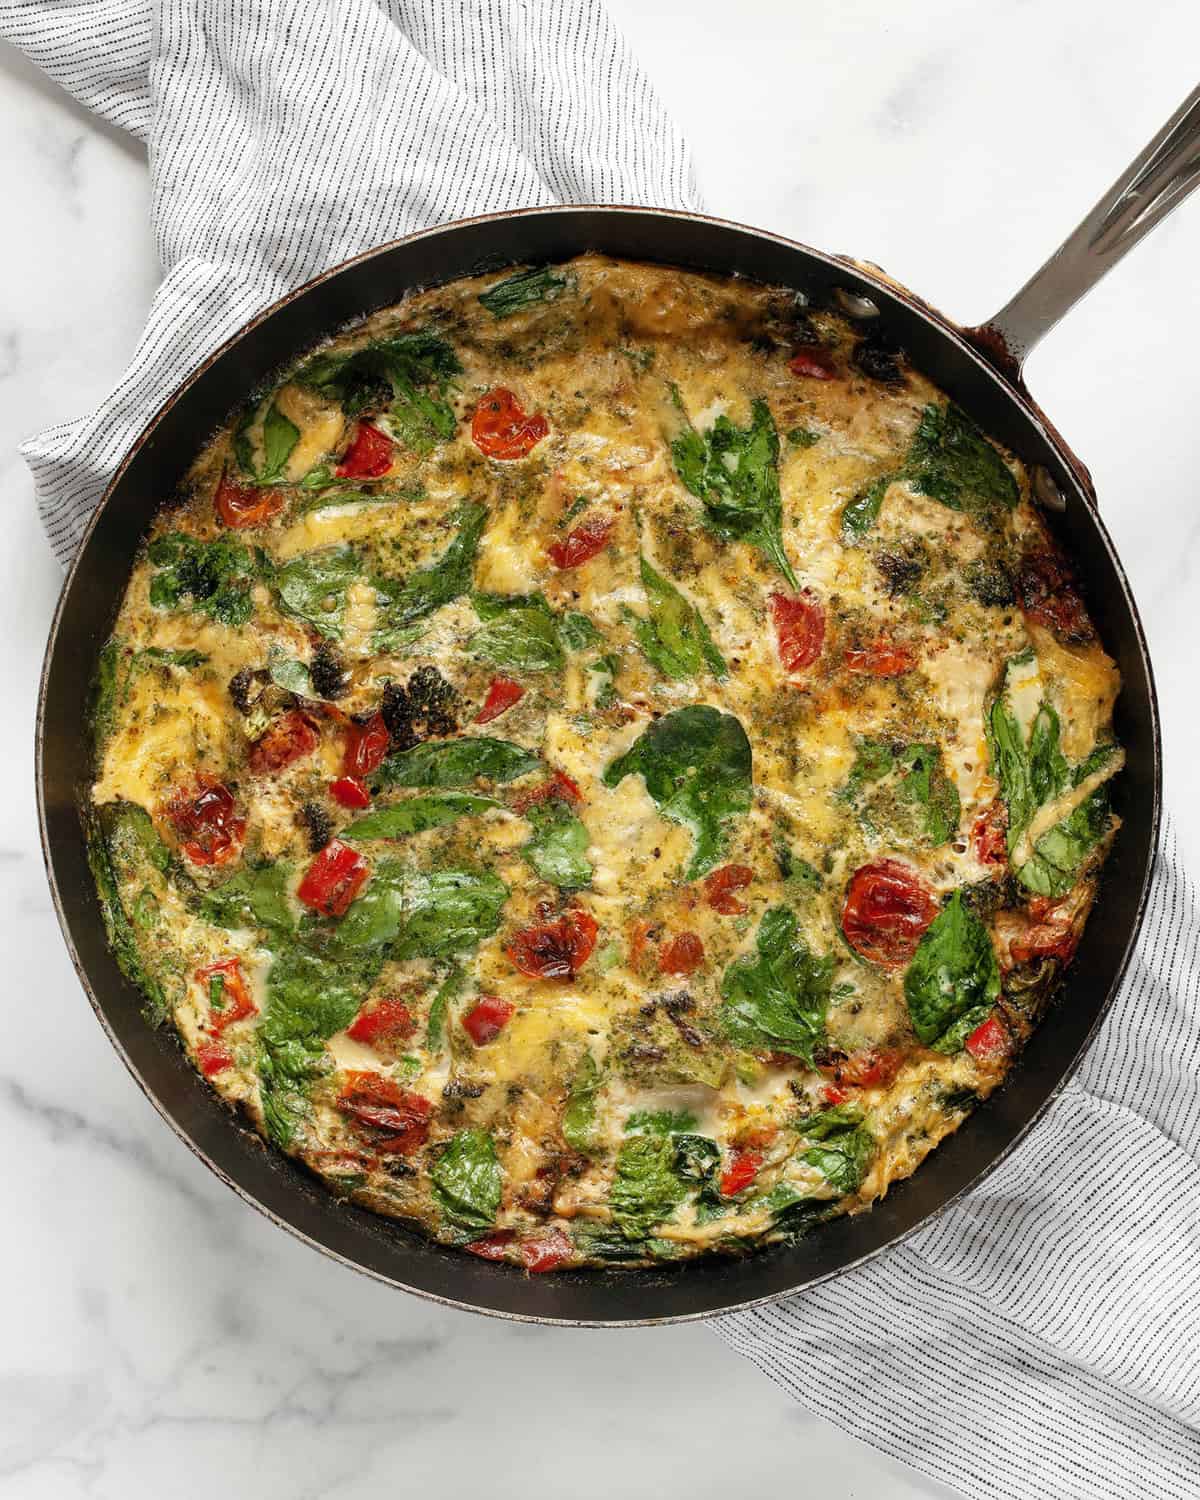 Egg white frittata with roasted vegetables in a skillet.